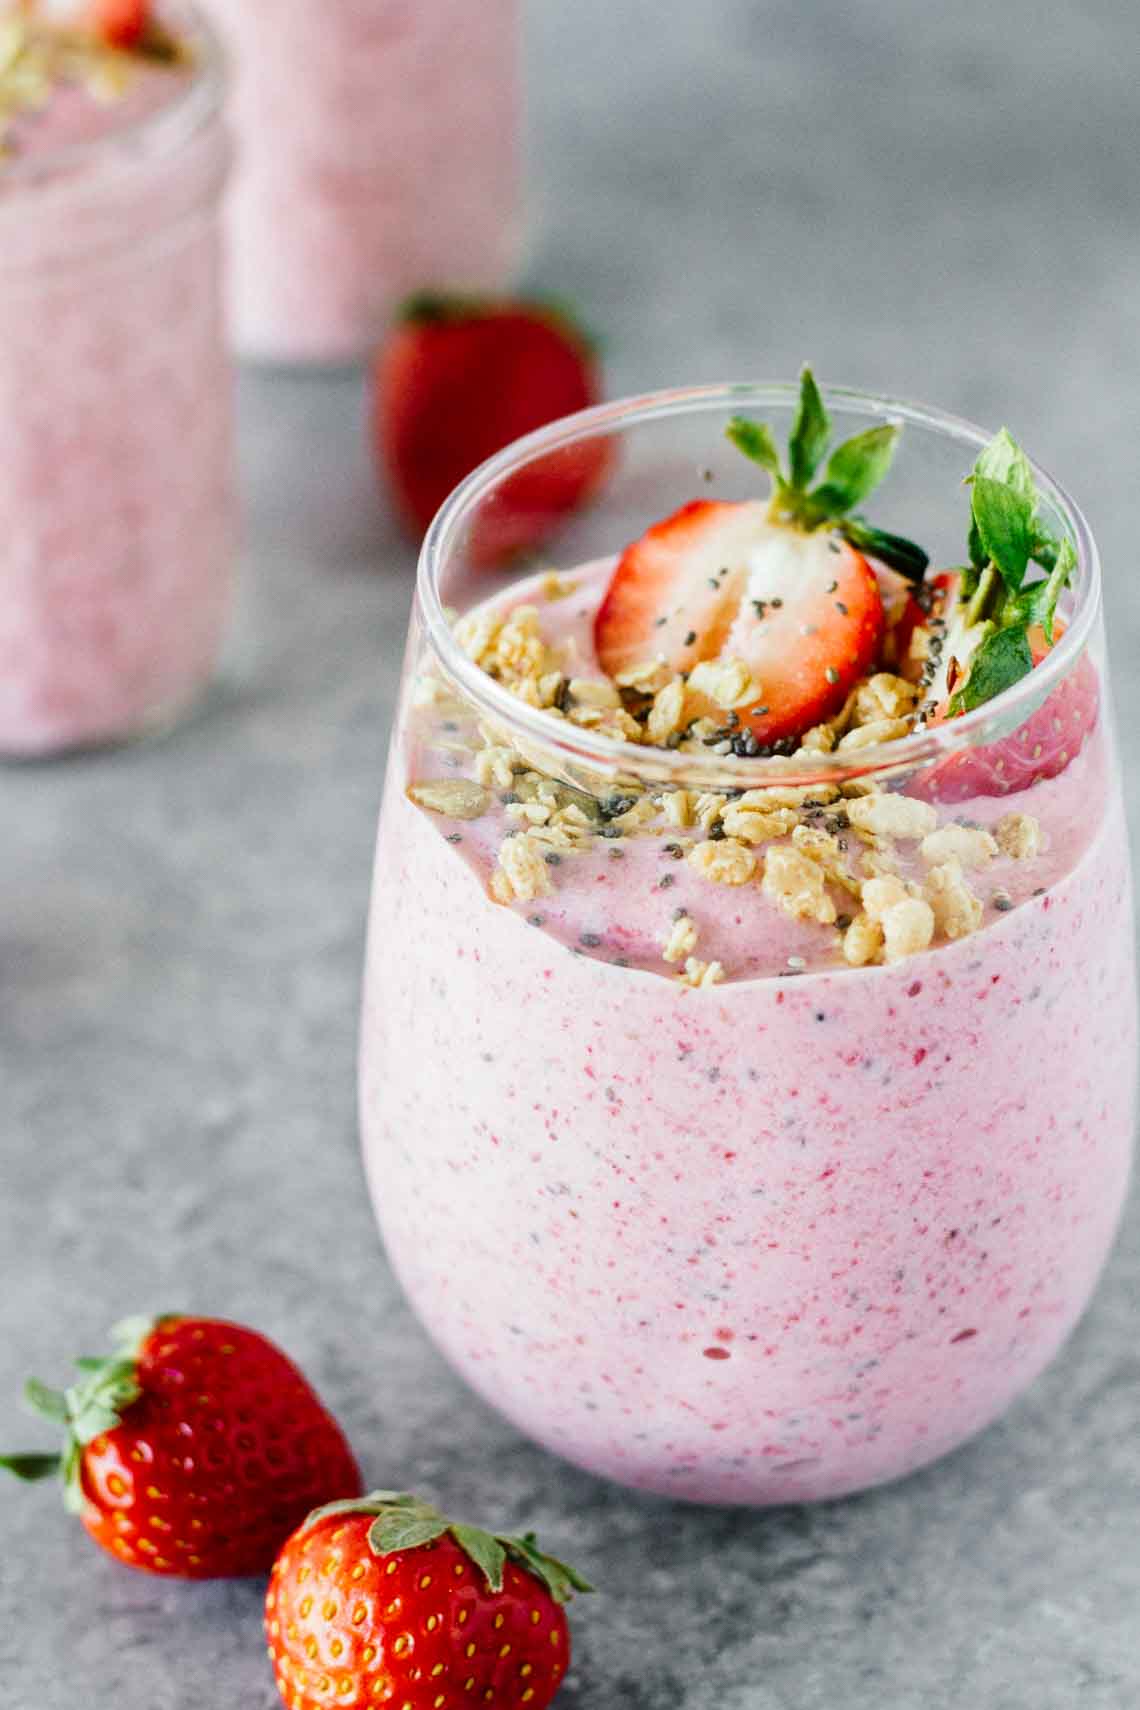 5 Nourishing Smoothies to Fire Up Your Muscles